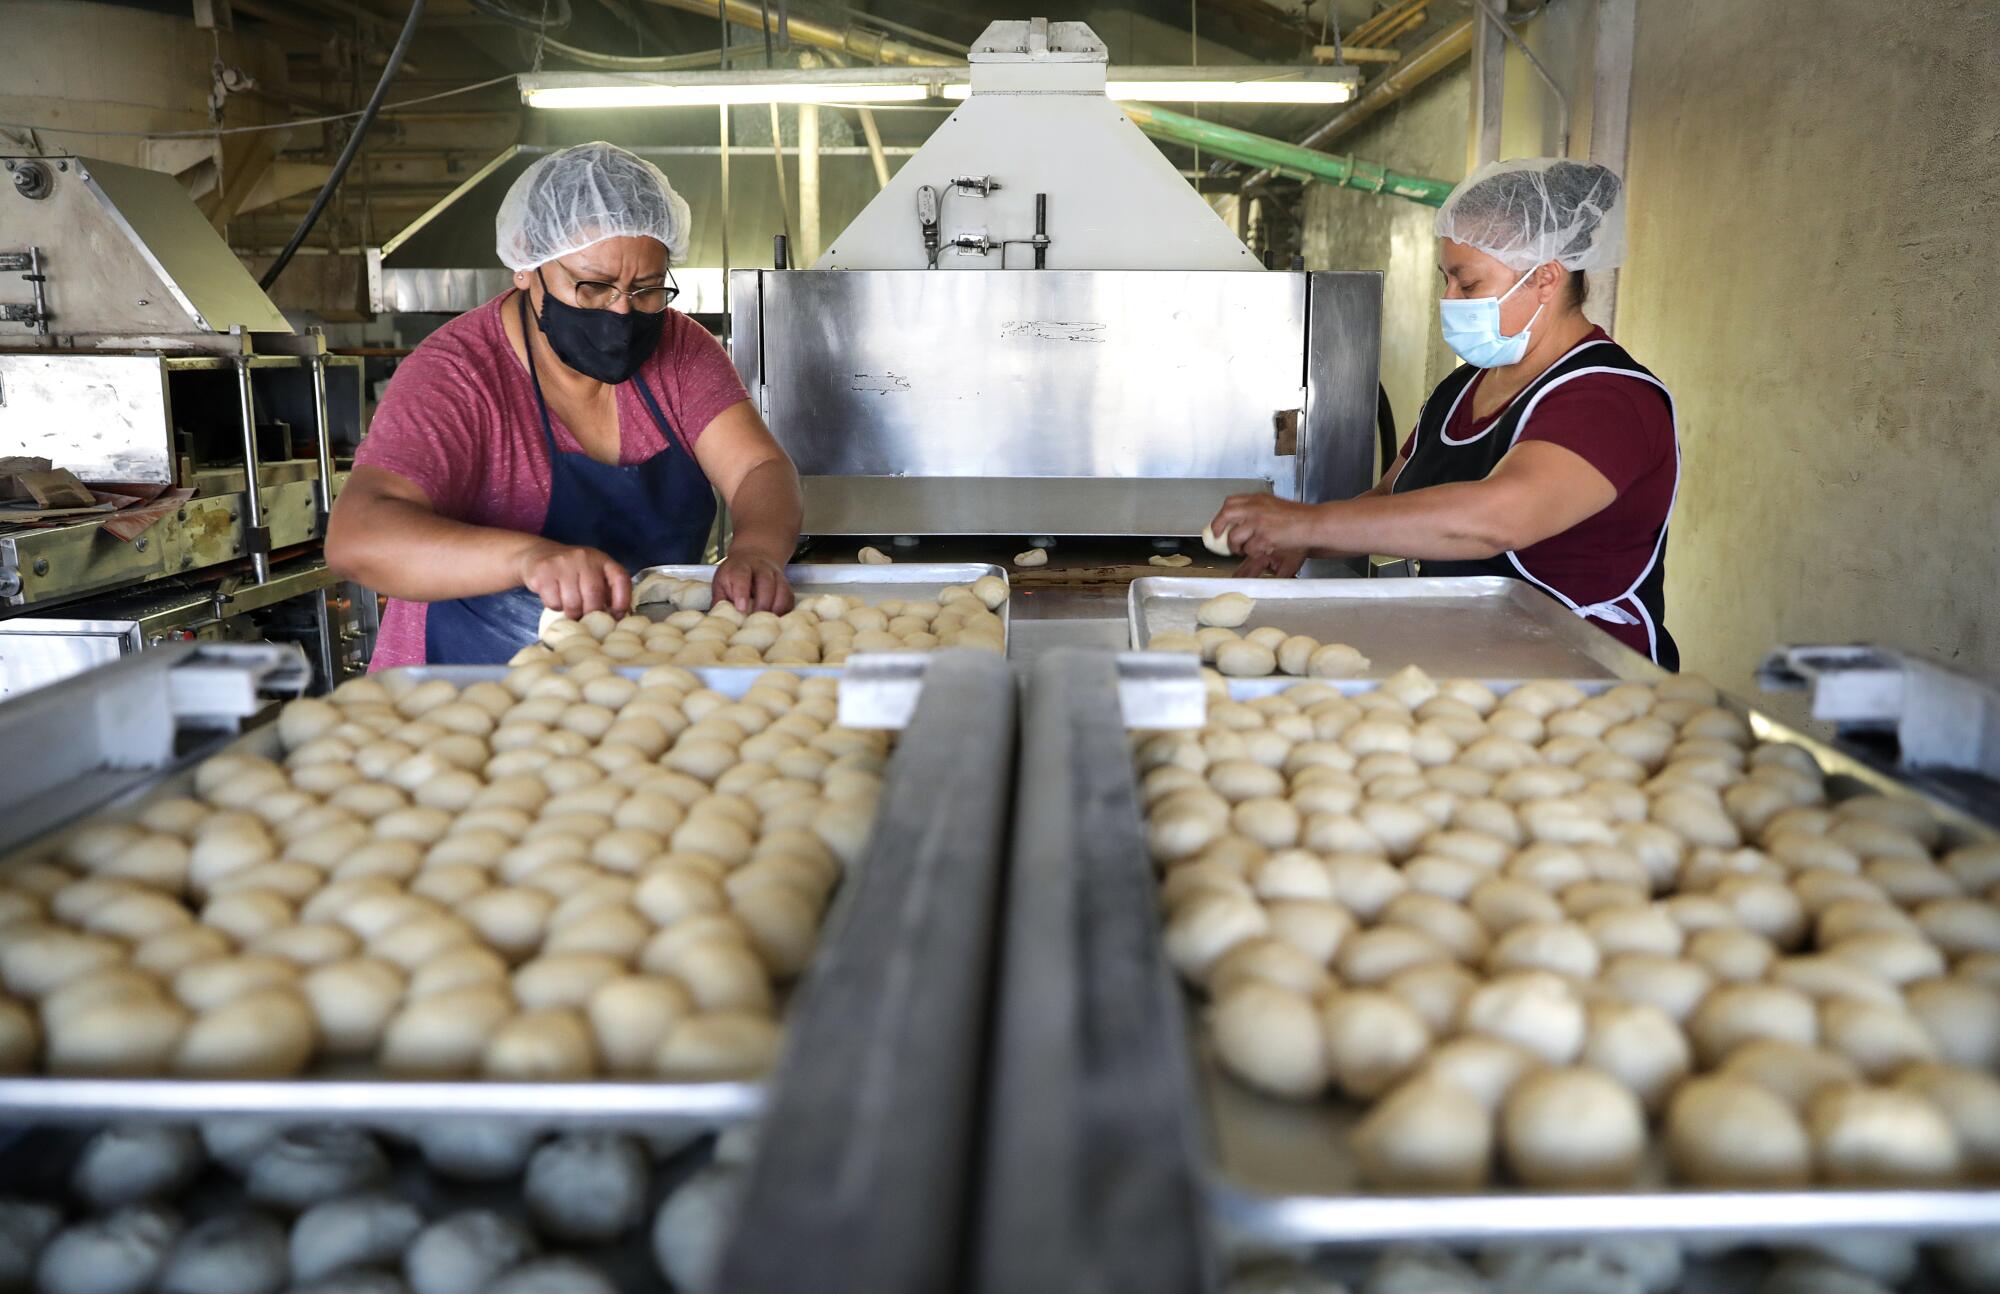 Two workers stand next to balls of dough on a machine